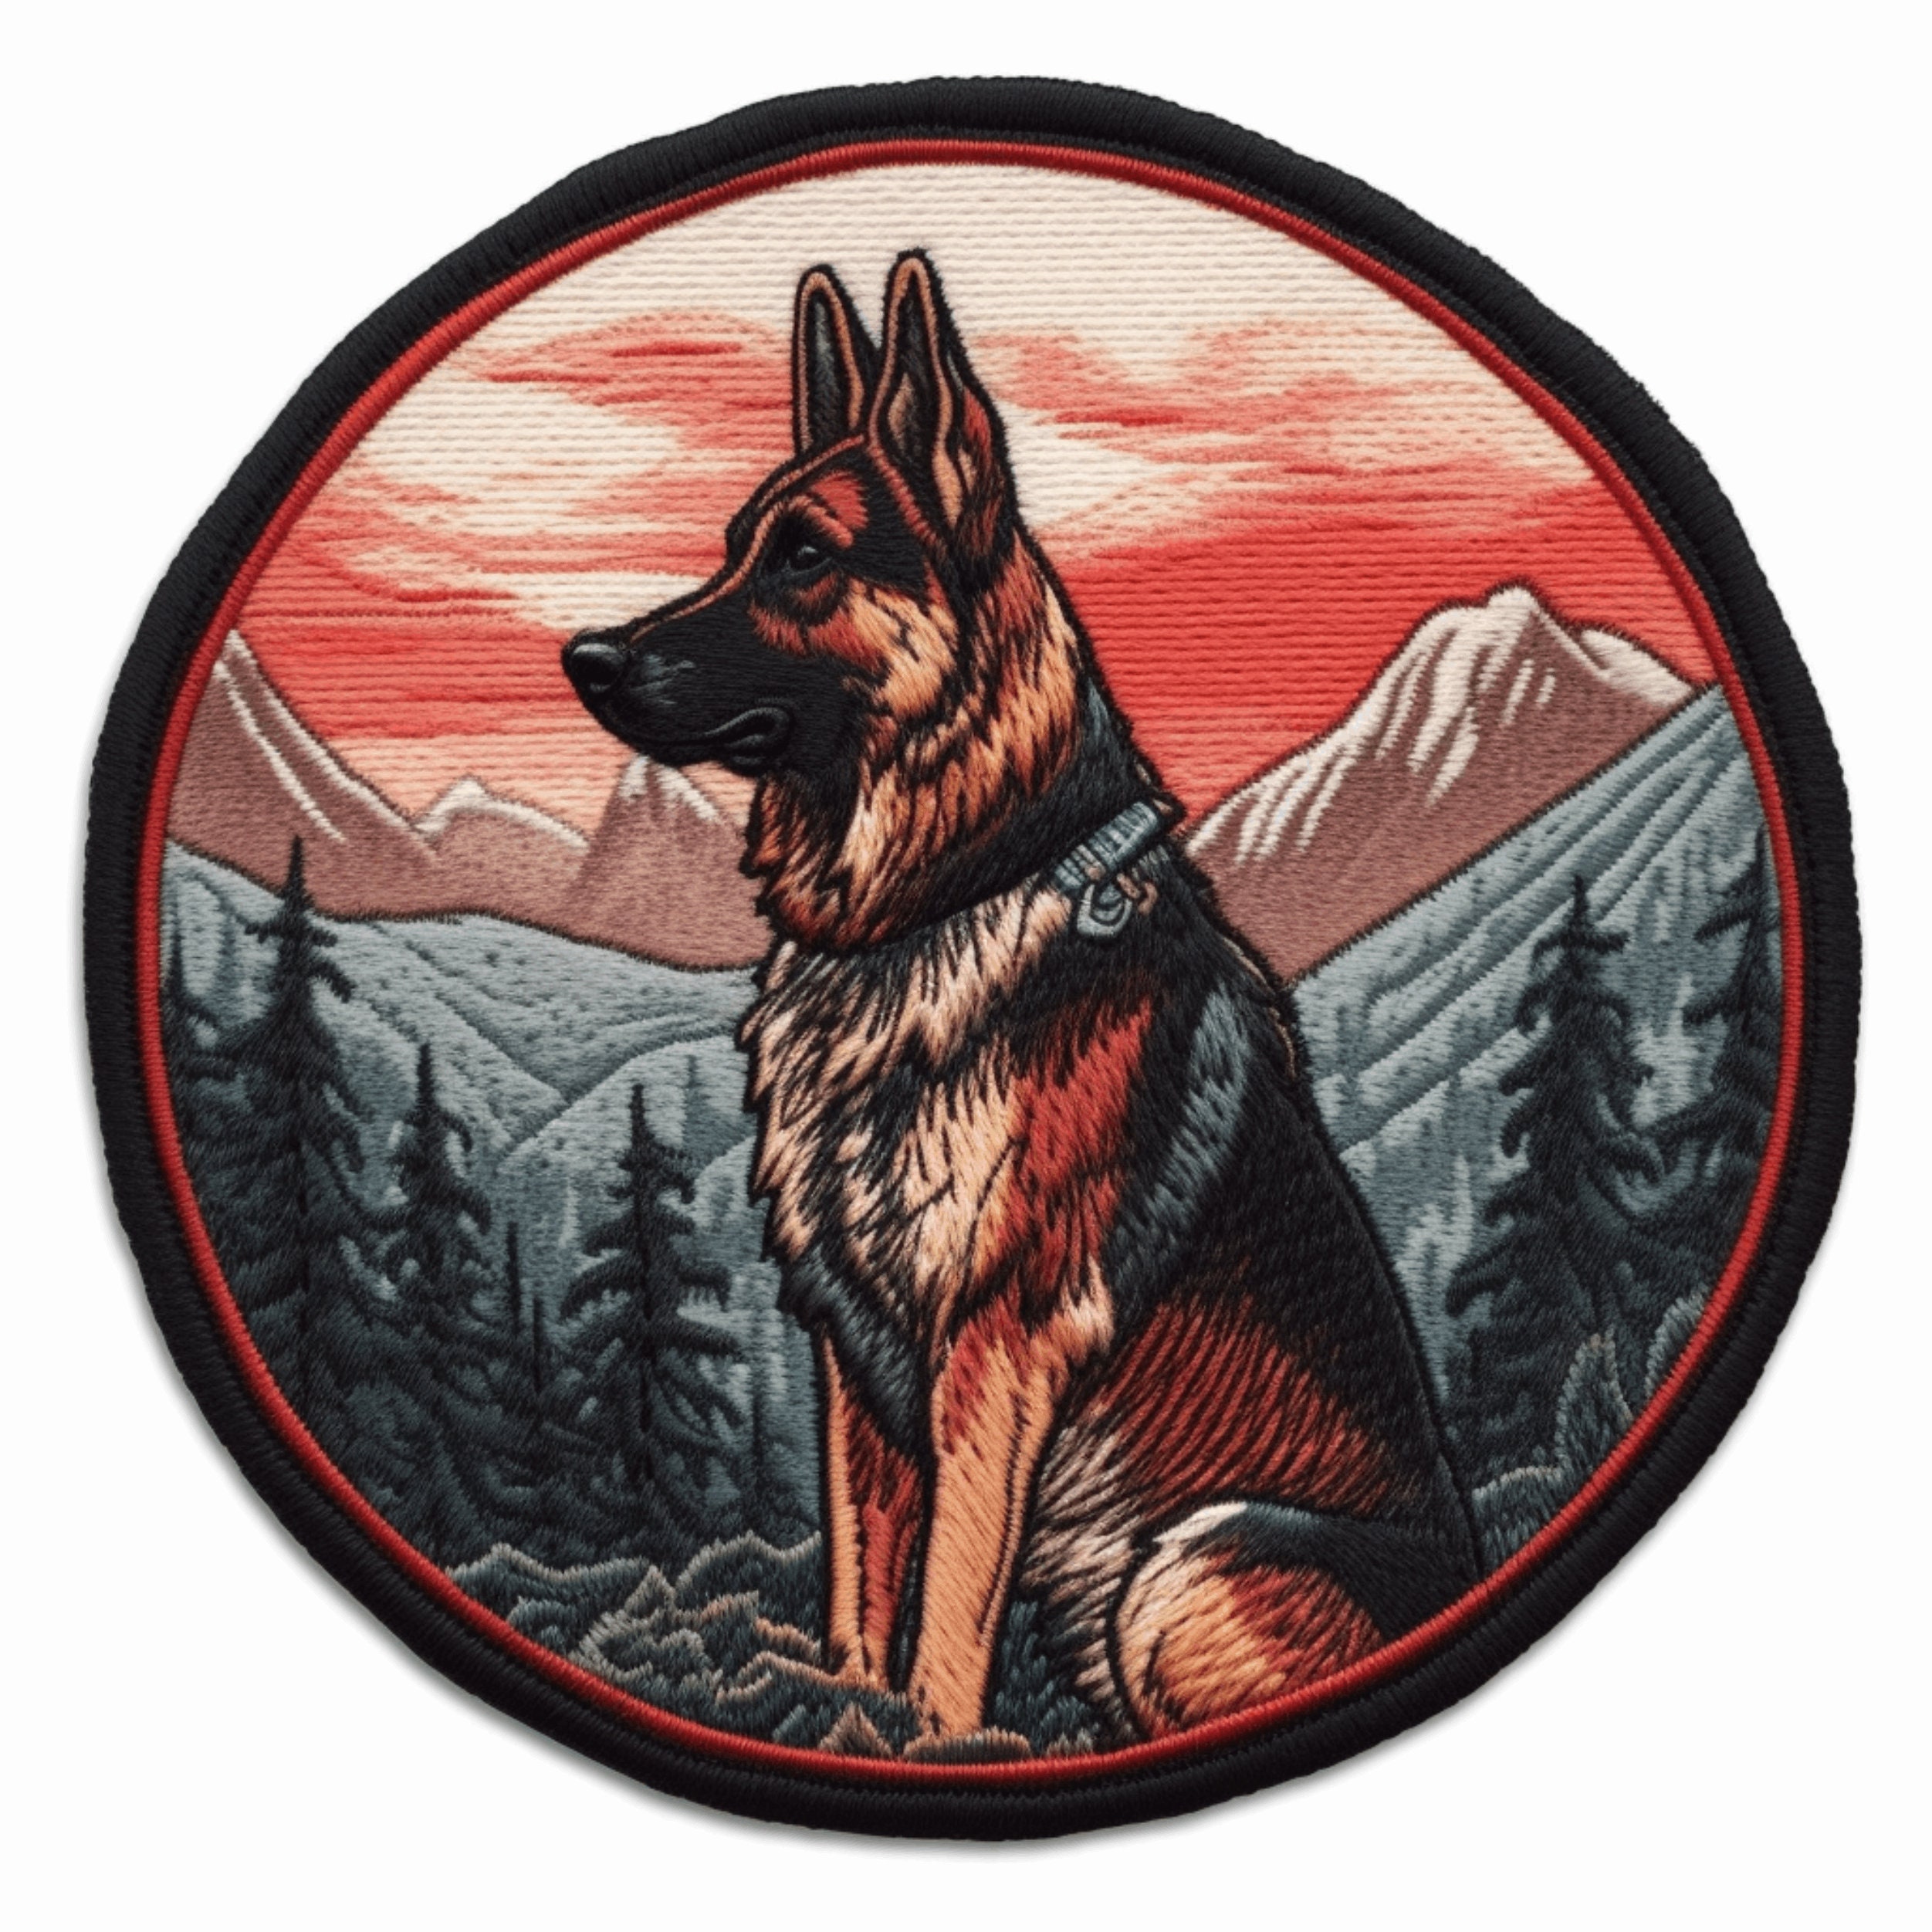 K9 K-9 PAW WOLF TRACKER Velcro Morale Tactical Patches 2